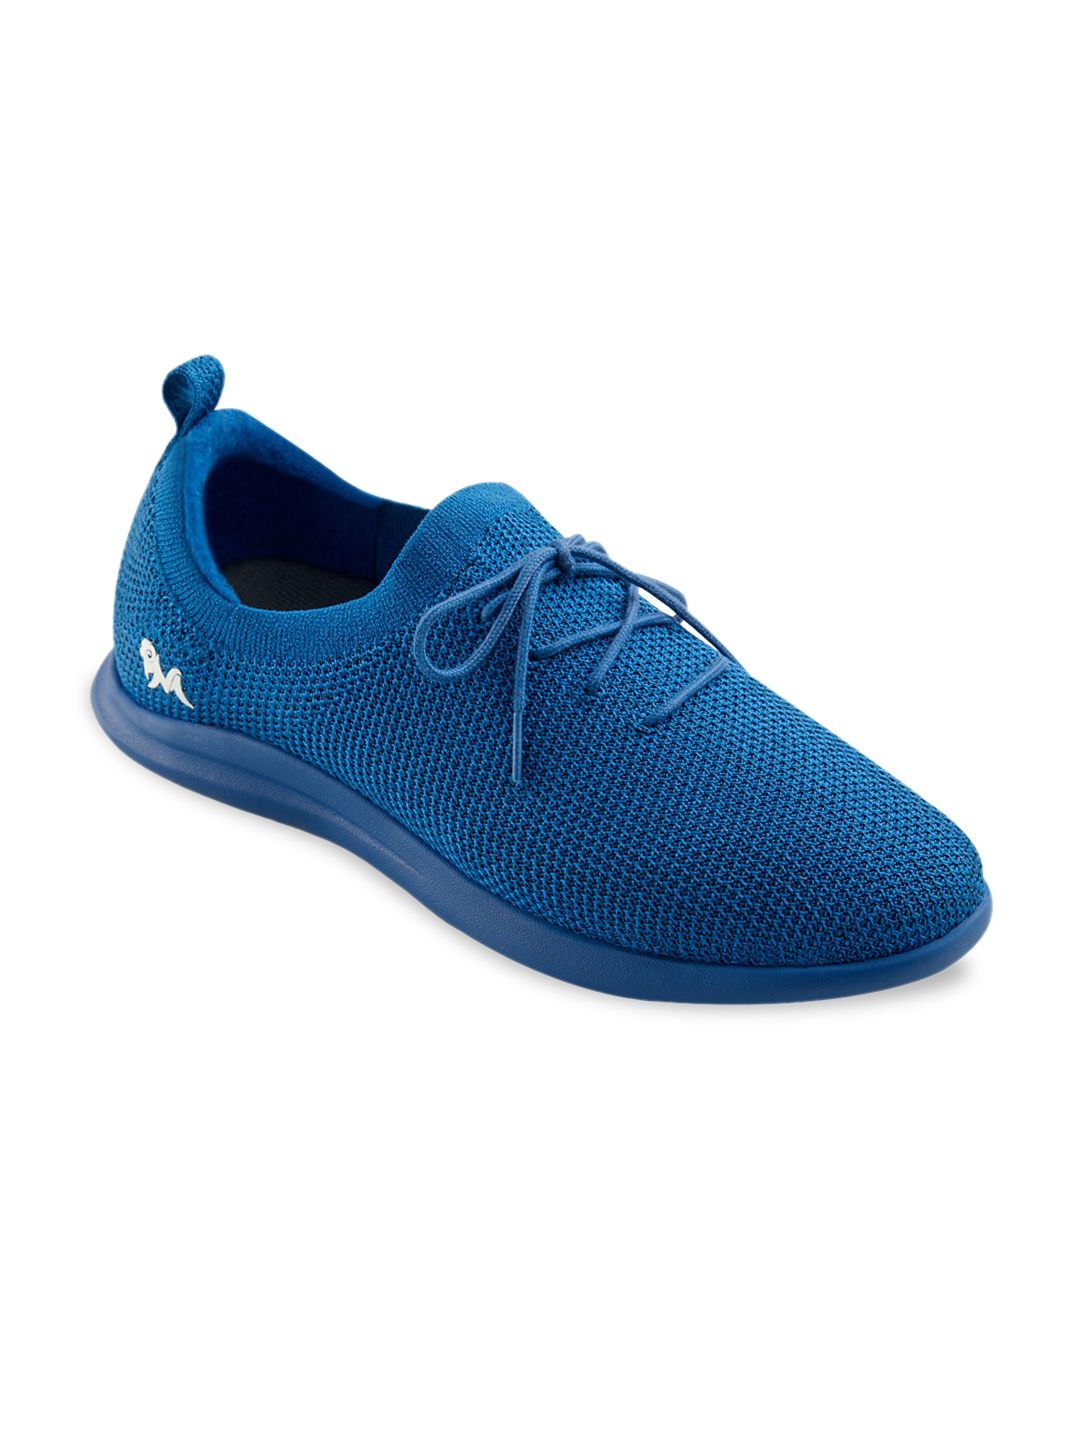 NEEMANS Unisex Blue Classic Re-Live Knit Sneakers Price in India